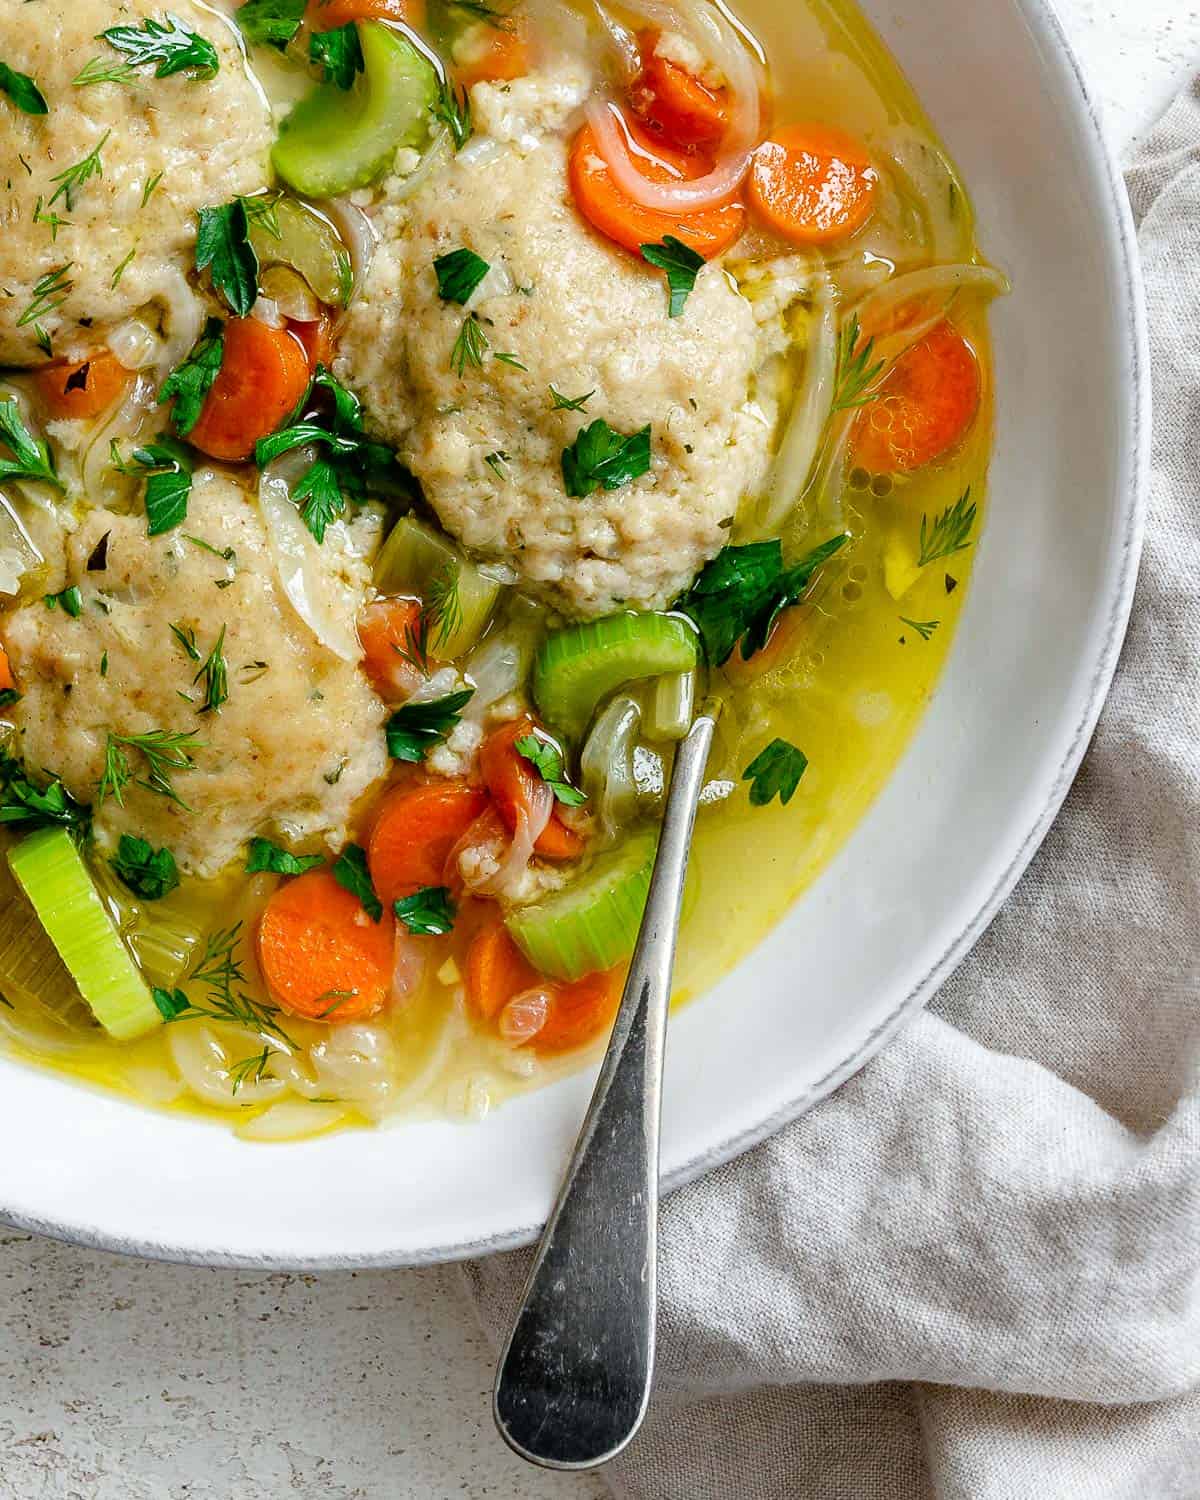 completed Vegan Matzo Ball Soup in a bowl